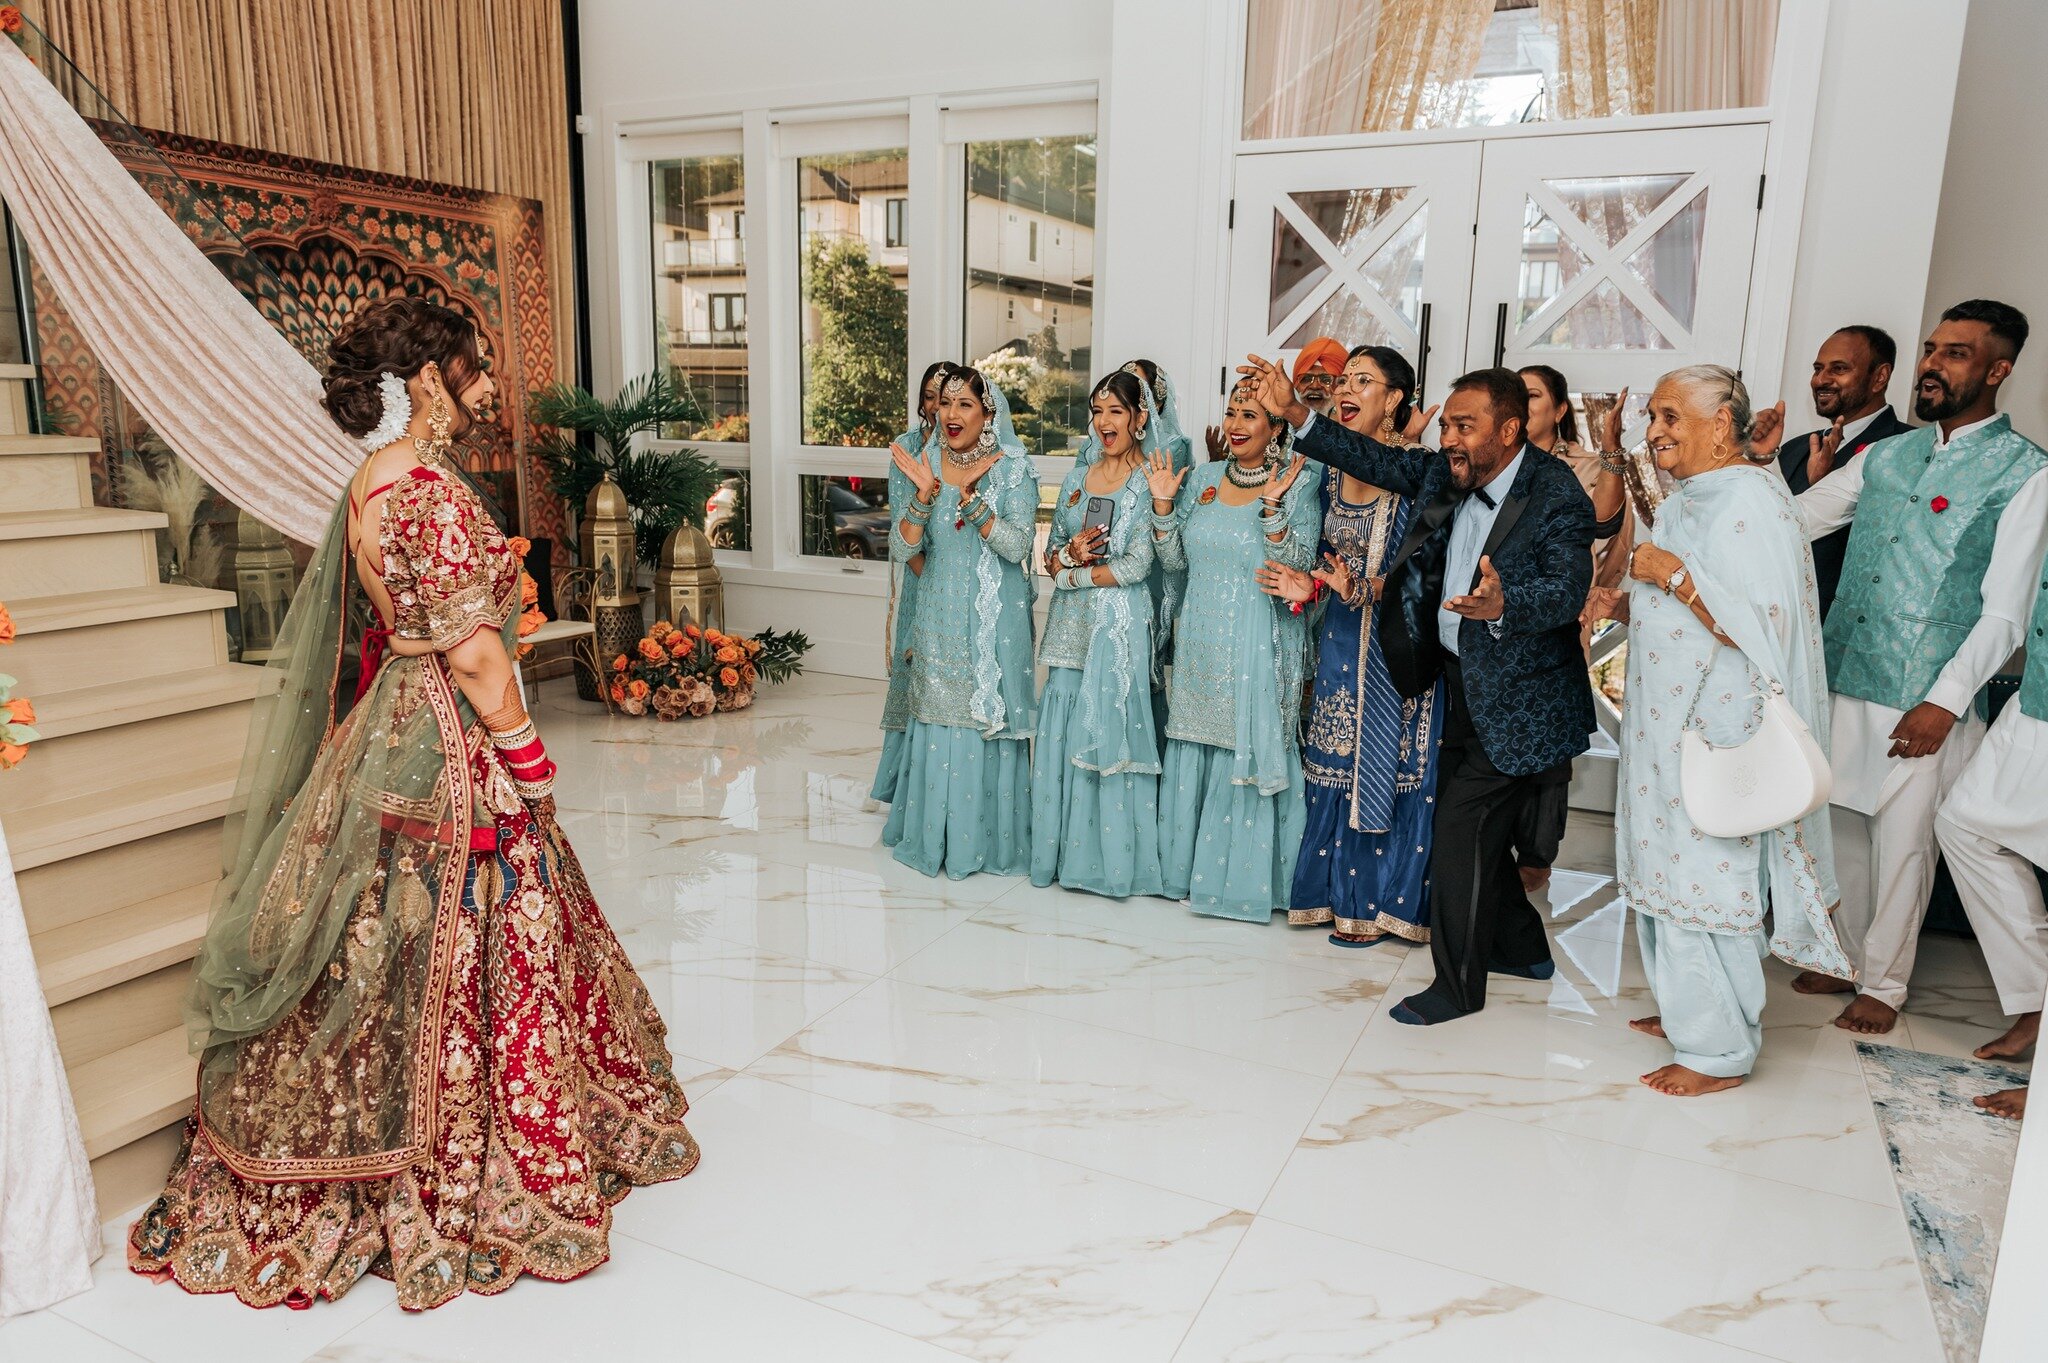 JYOTI &amp; GURPAL @jyotijohal__

Makeup: @amnas_studio
Brides Outfit: @seemagujraldesign
Decor: @decorbypolly_

Getting Married? Book Glimmer - https://www.glimmerfilms.ca/

&mdash;&mdash;&mdash;&mdash;&mdash;&mdash;&mdash;&mdash;&mdash;&mdash;&mdas